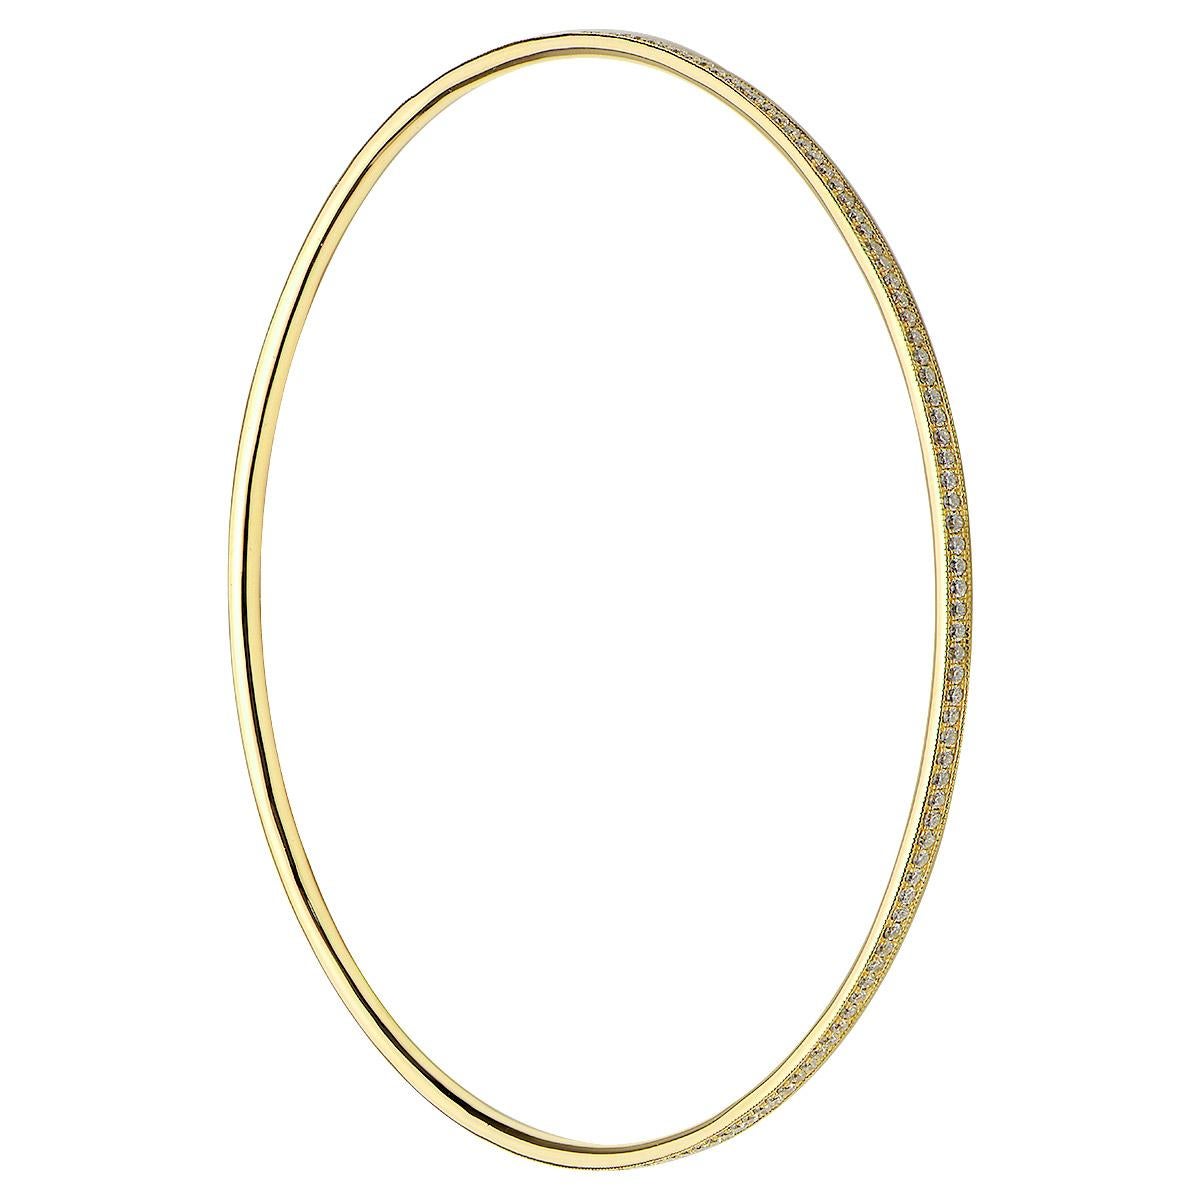 Bangles are so much fun to wear and add a special touch. This yellow gold and diamond bangle contains 6.5 grams of gold and 174 round VS2 , G color diamonds totaling 0.90 carats. It is 2.5 inches in diameter and looks amazing alone or stacked with